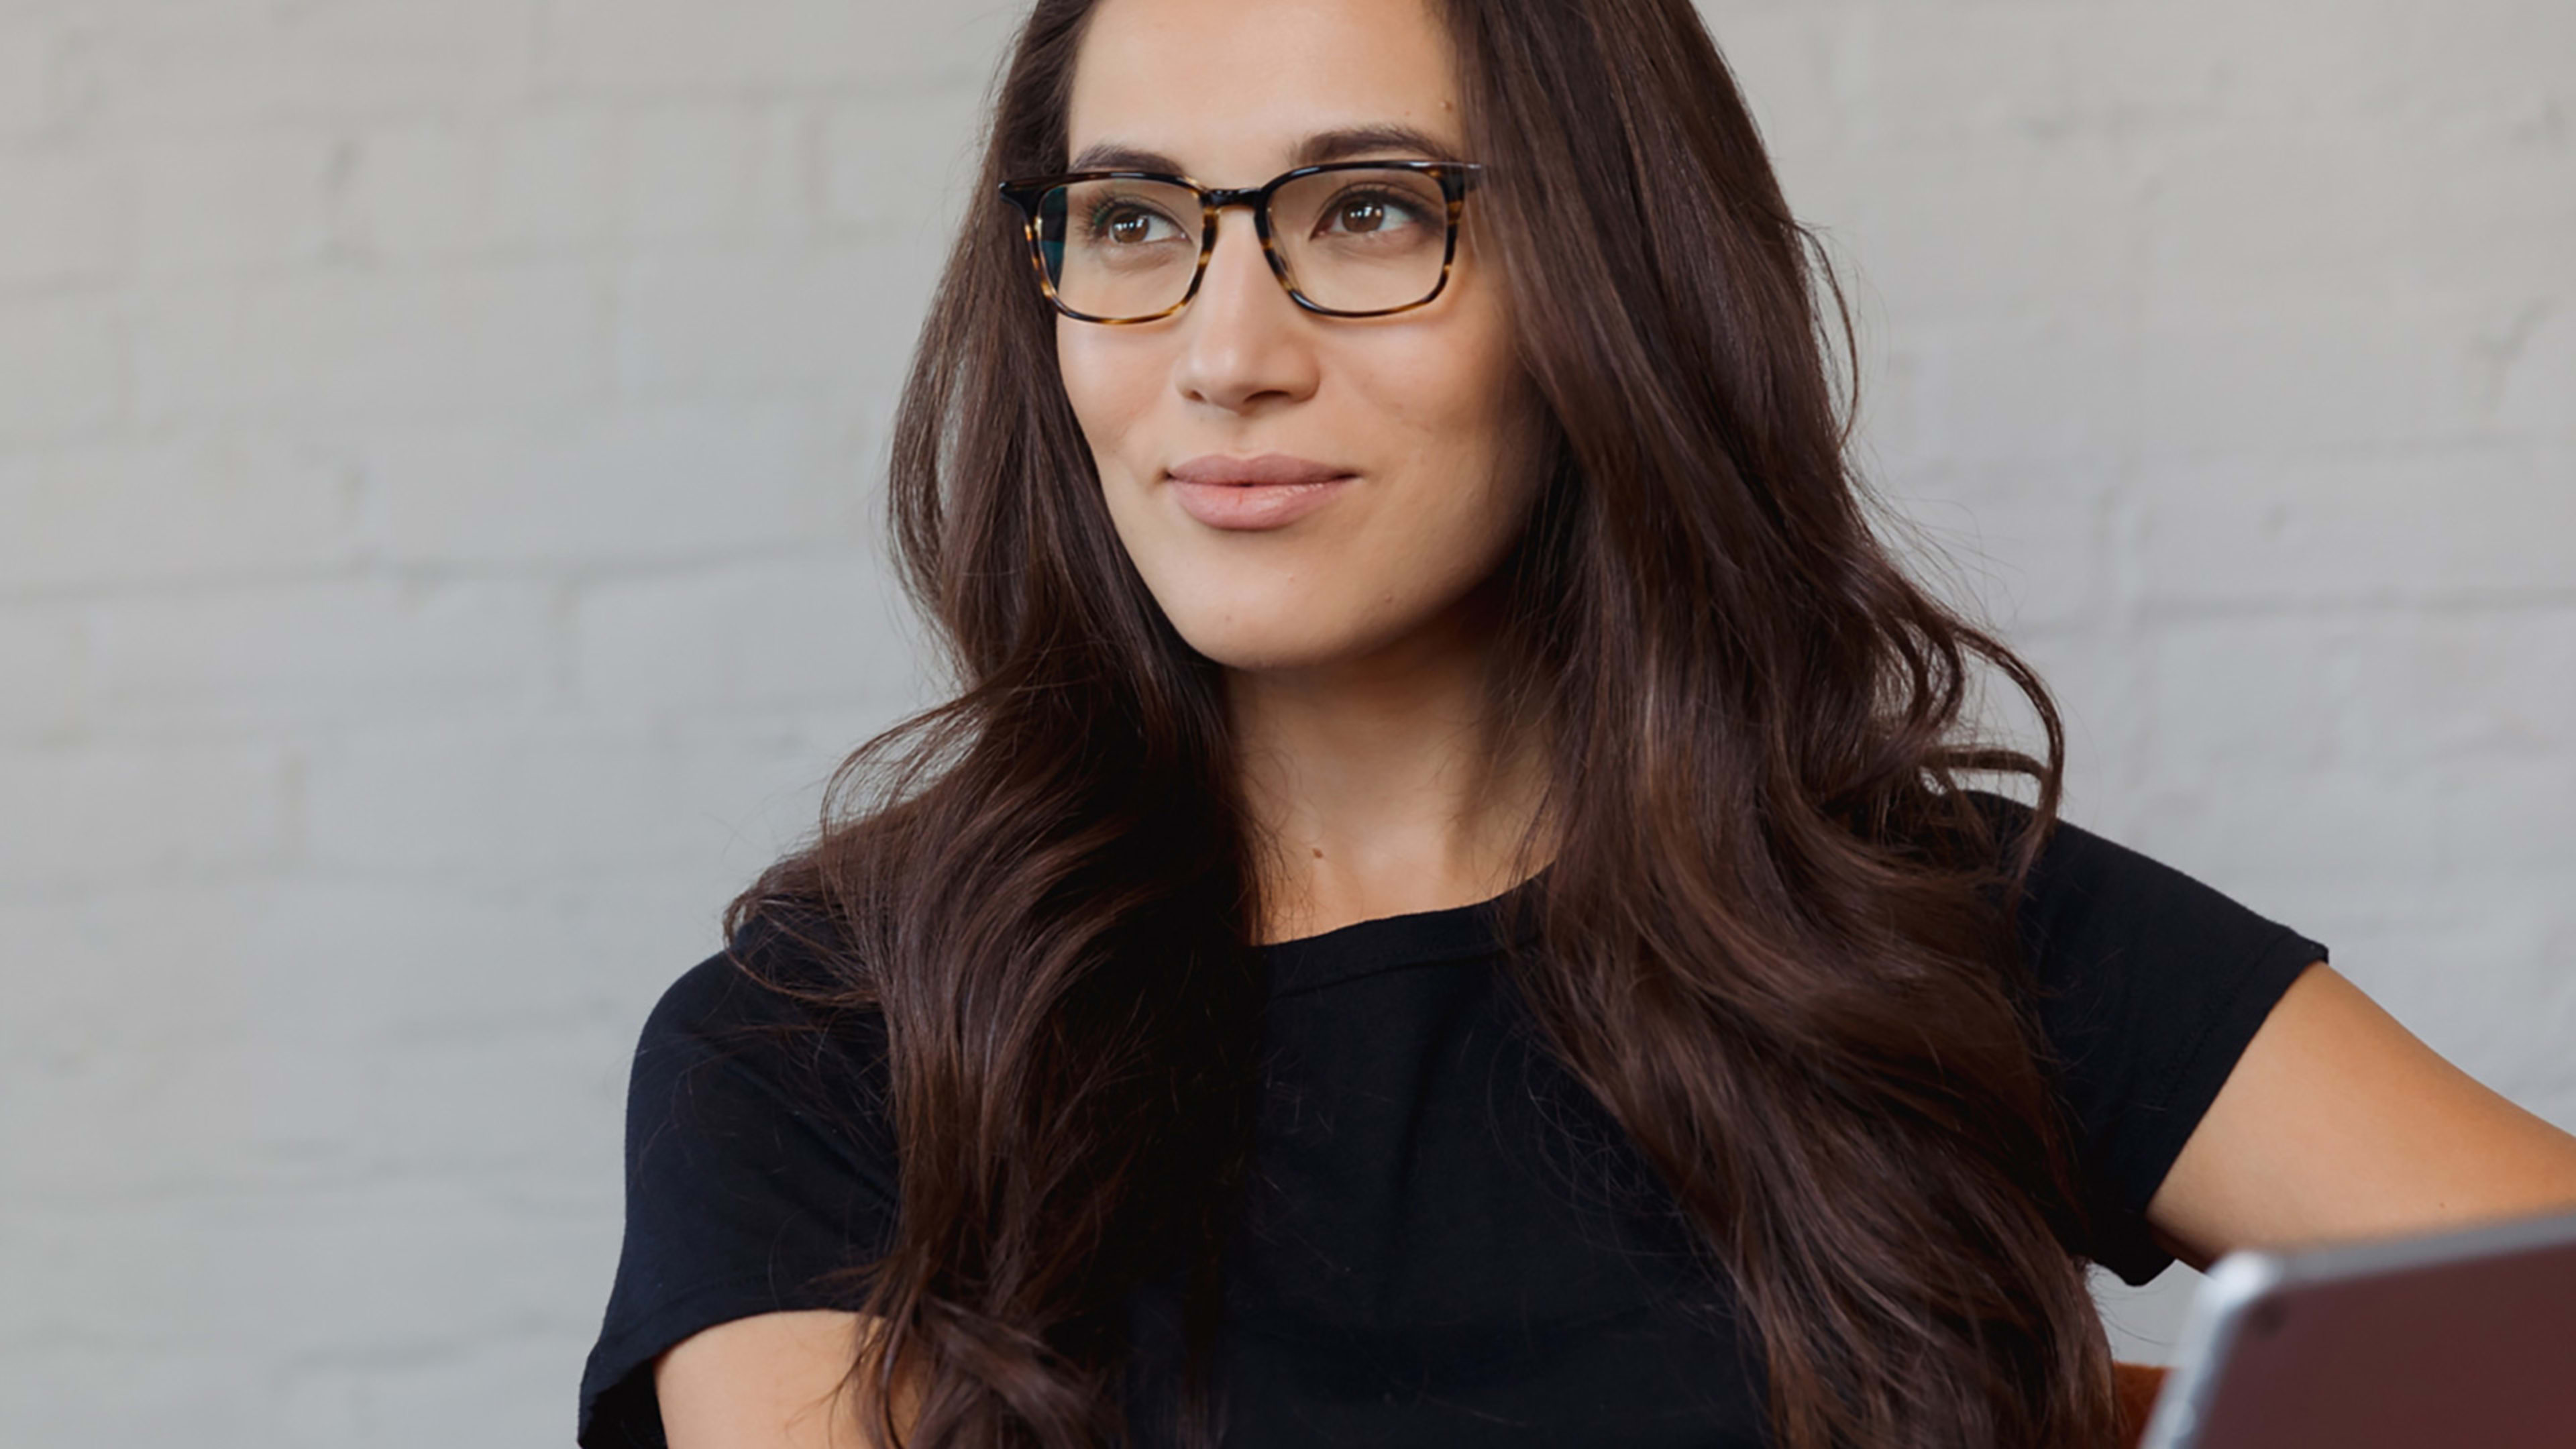 Too much screen time? This eyewear startup may have a $95 solution